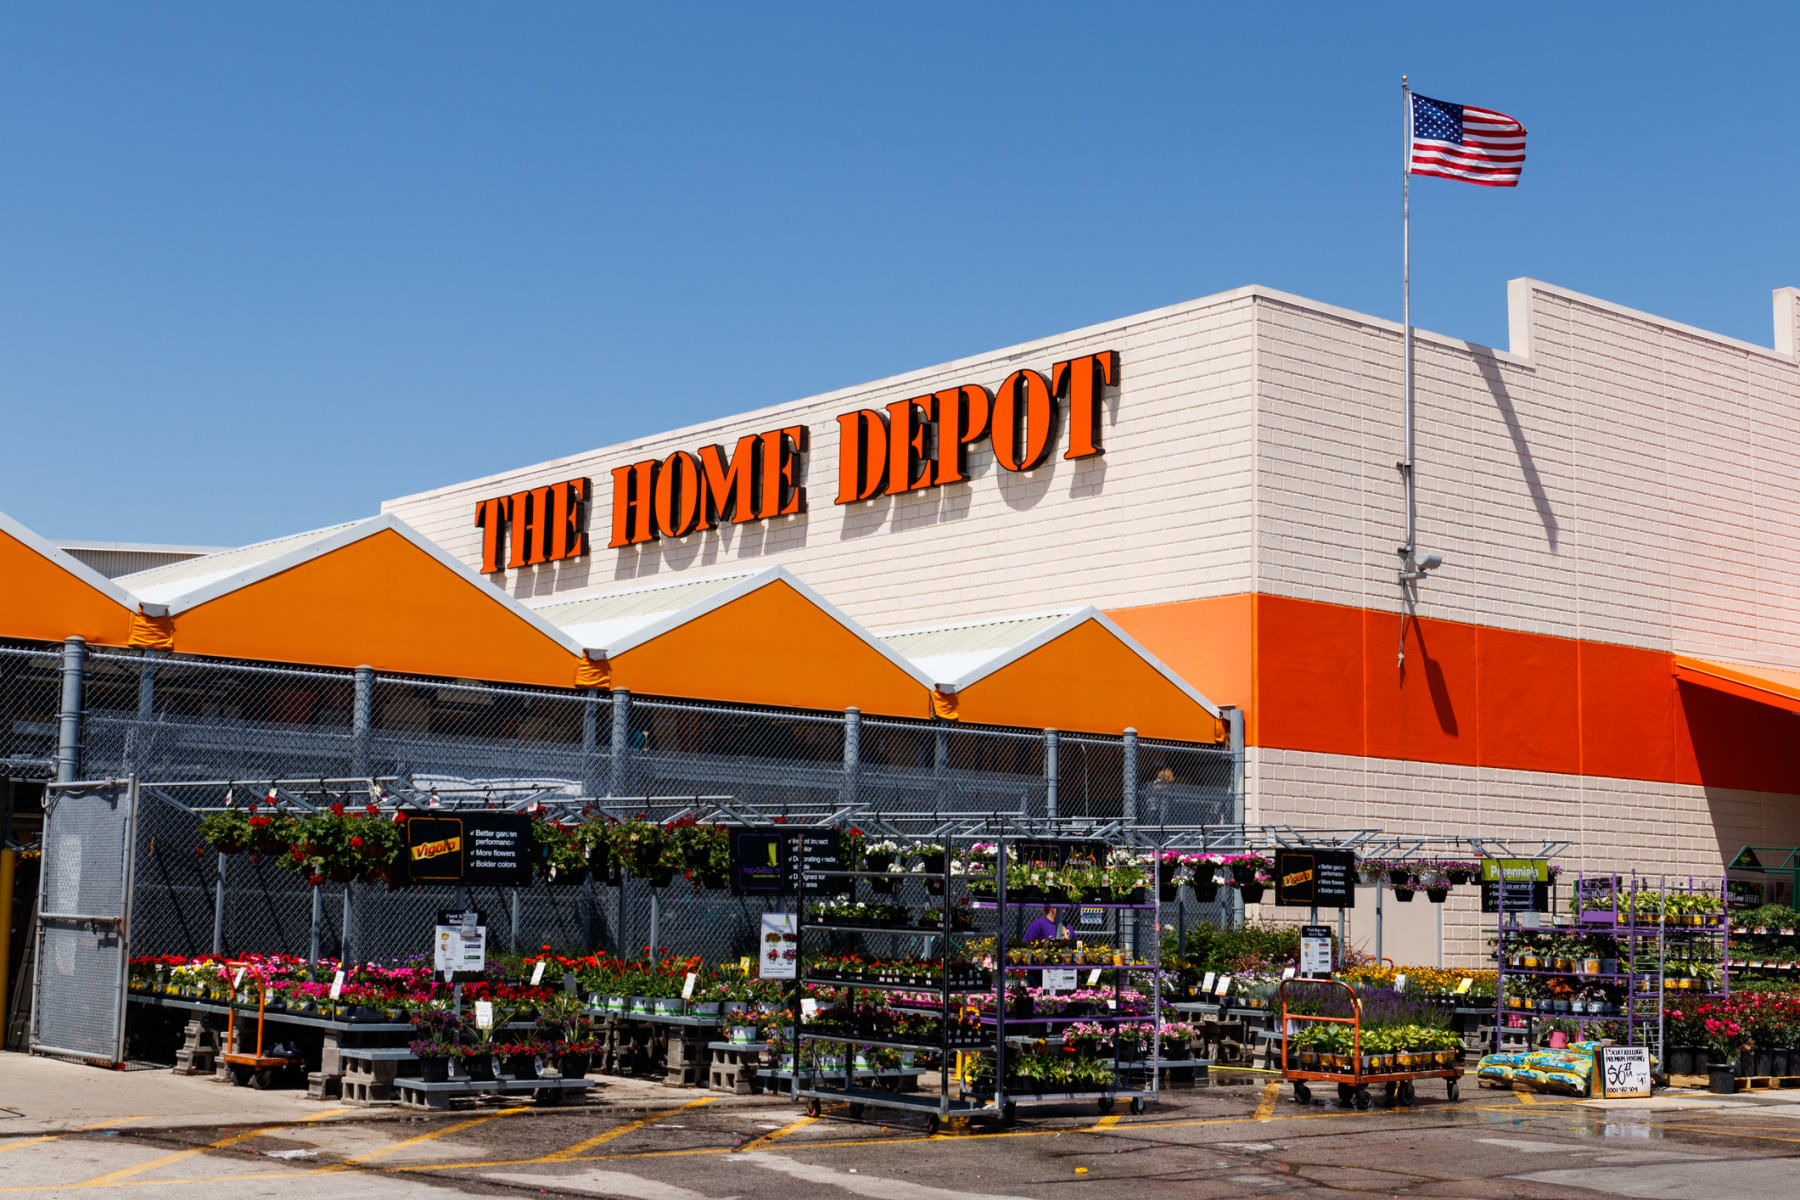 A Home Depot storefront in Indianapolis